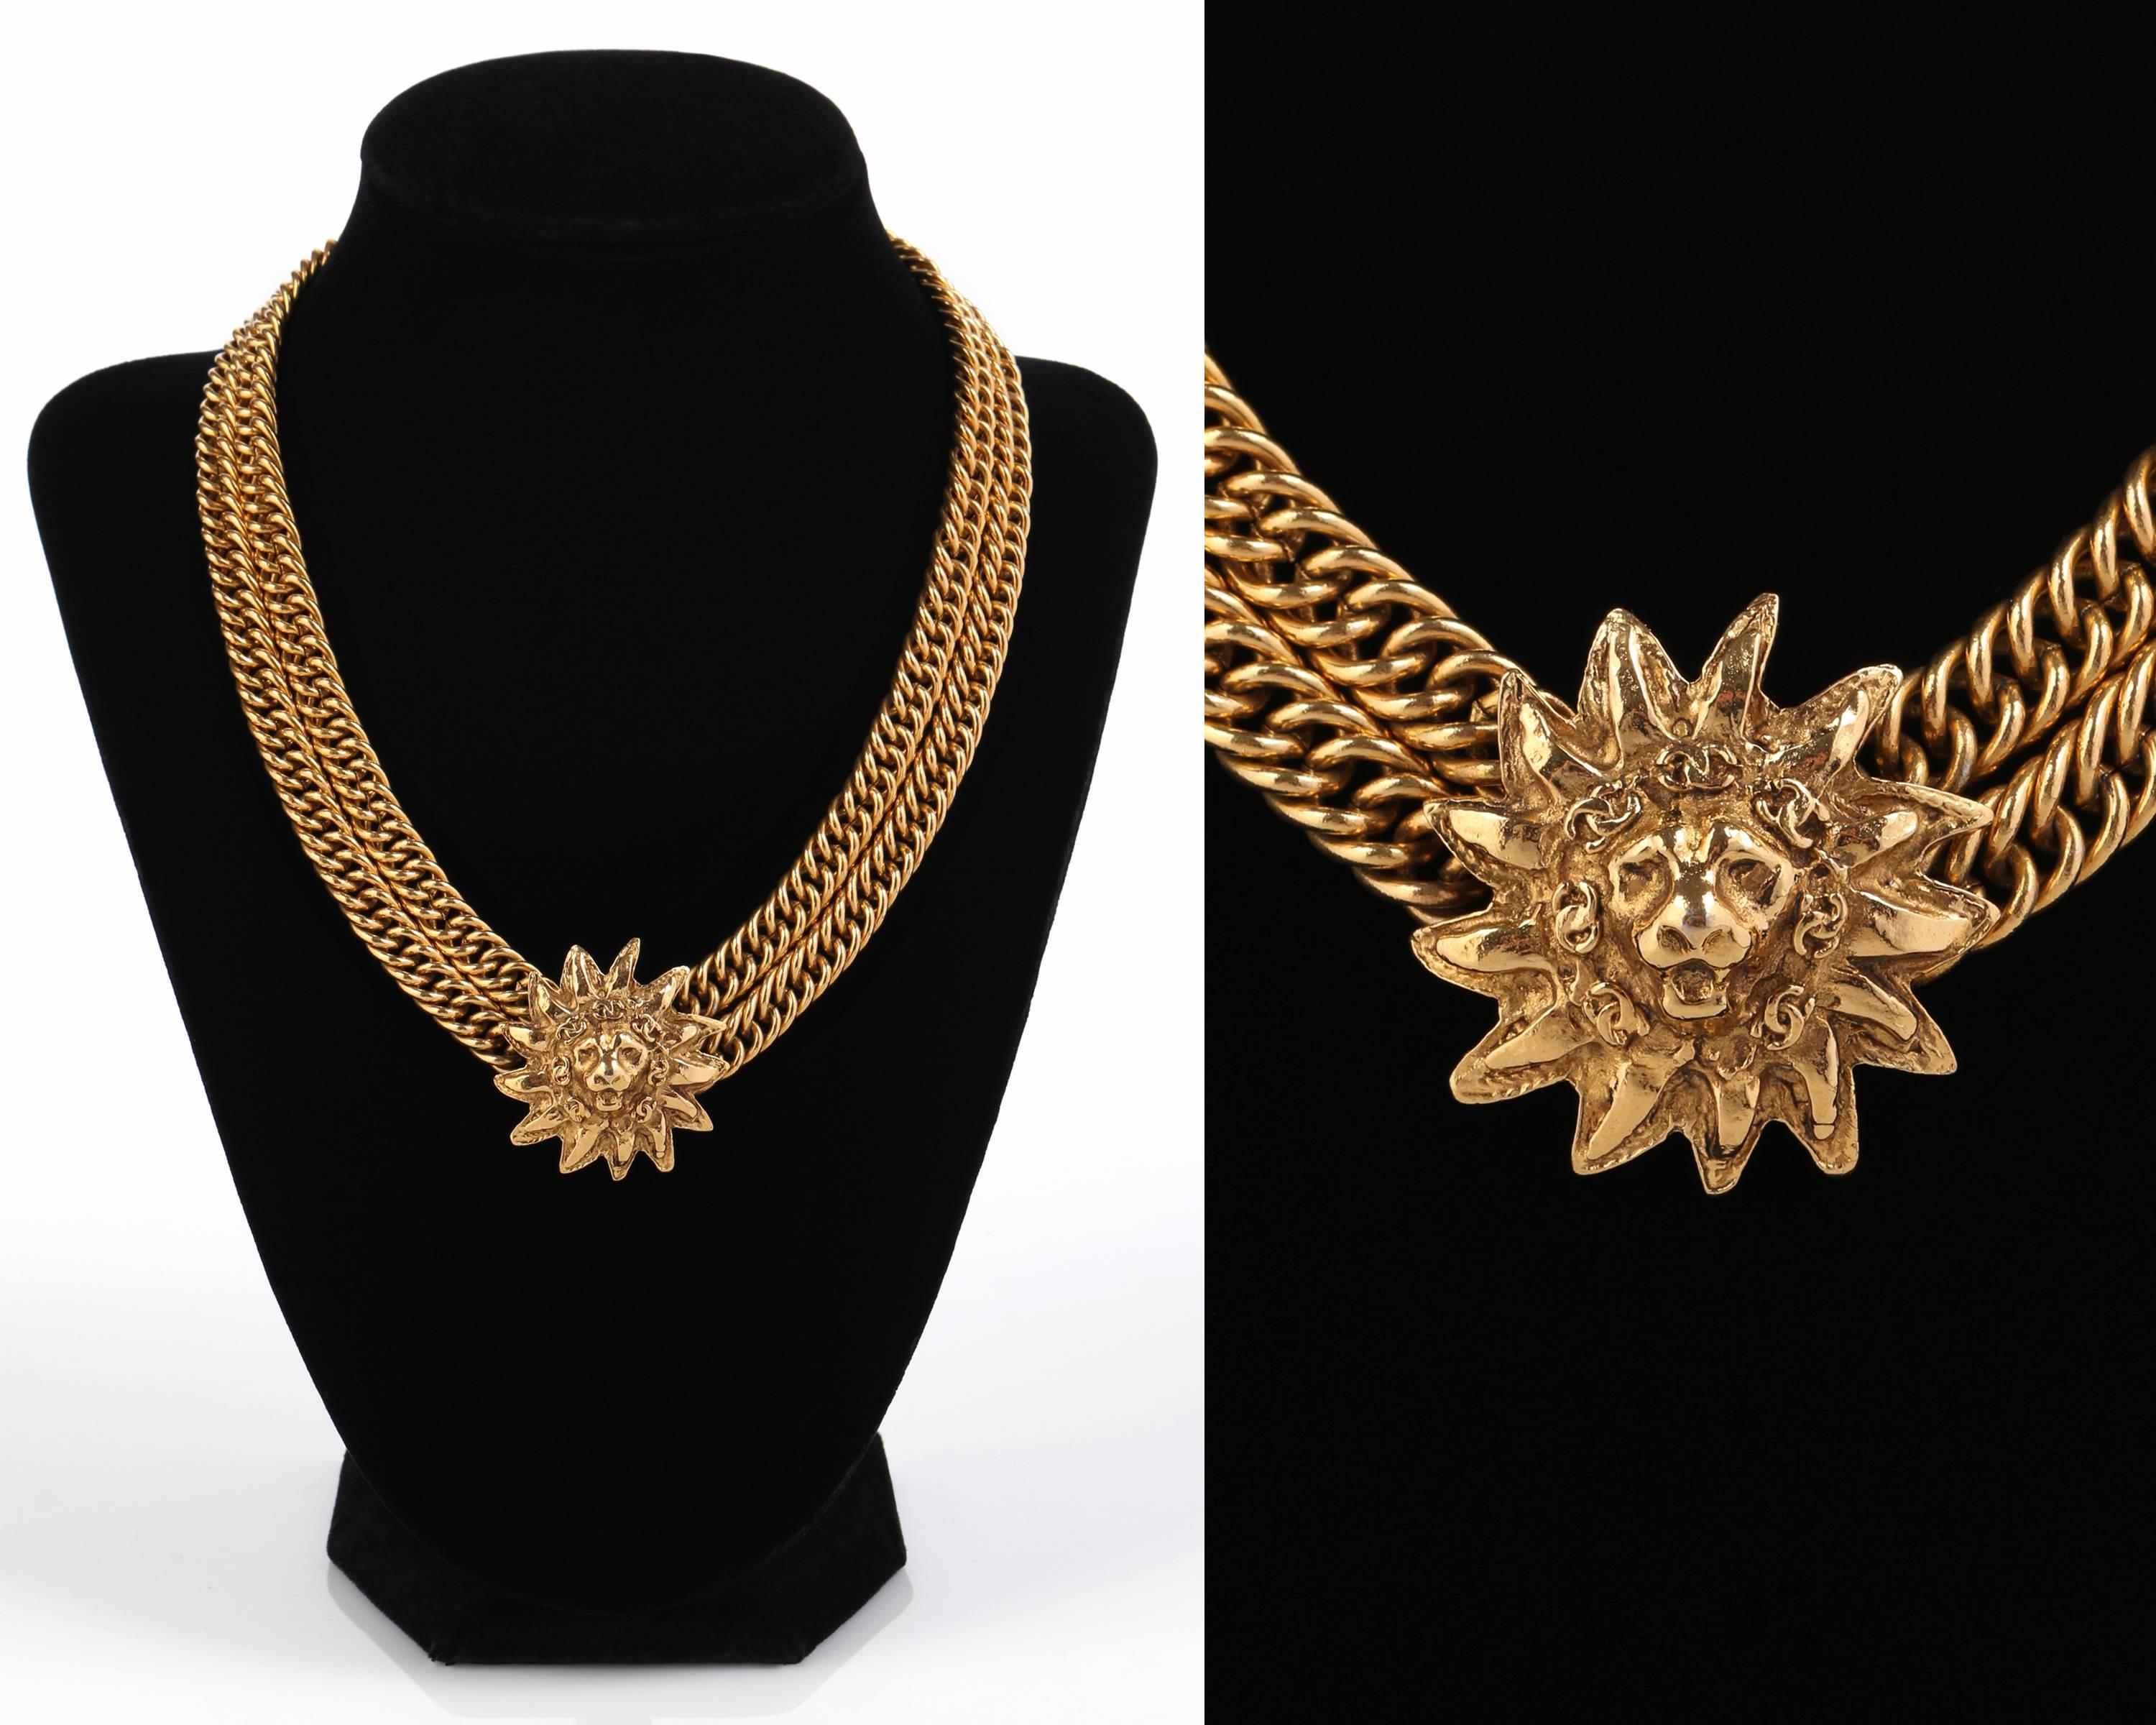 Vintage early c.1980's Chanel CC logo Lion sun gold tone double chain necklace.  Lion head sun pendant is mounted on center of double chunky curb chains measures approximately 1 1/4